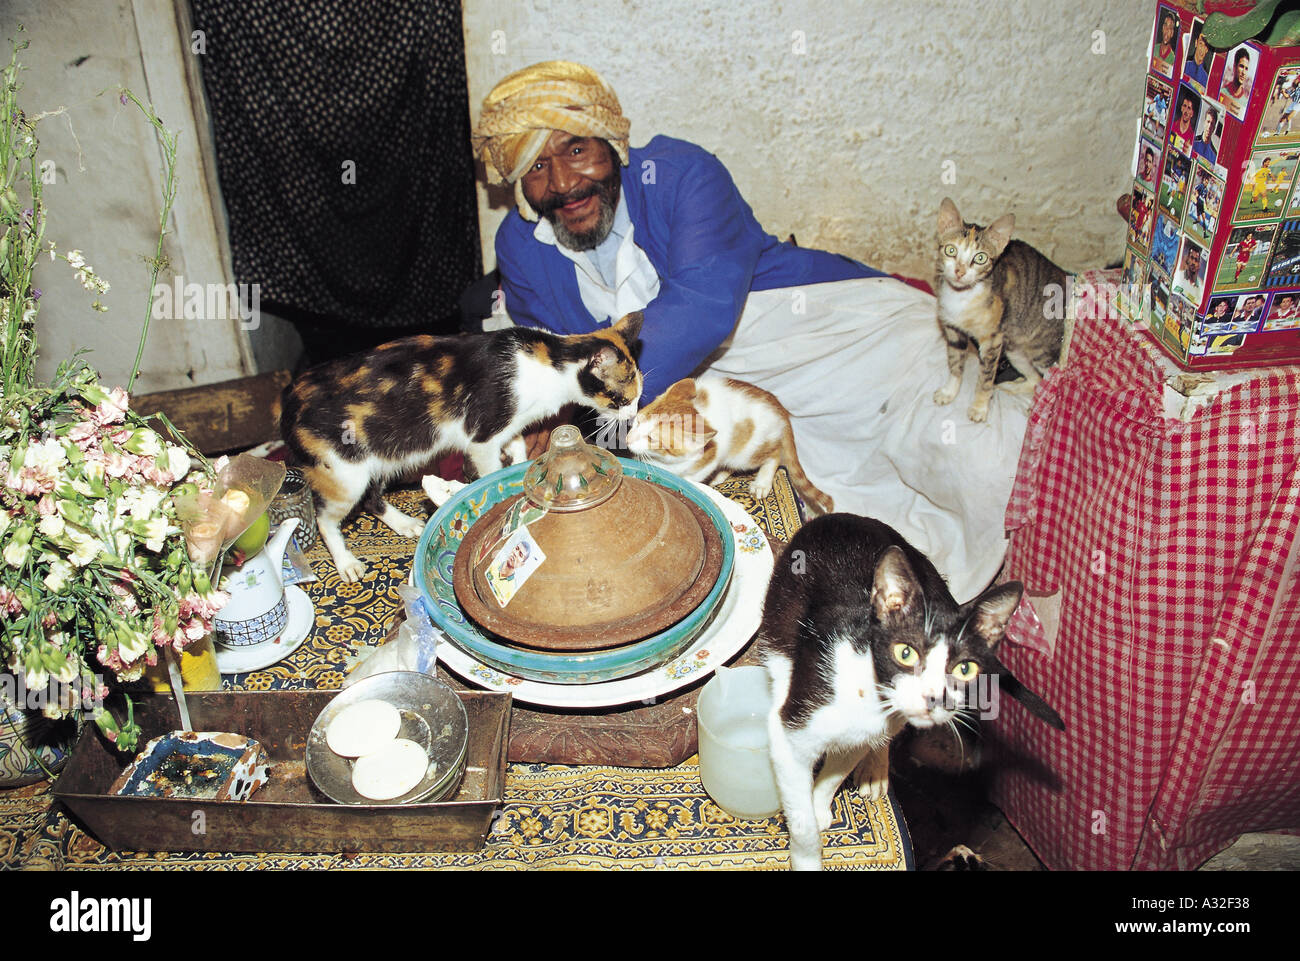 Toilet attendant with cats in Fez, Morocco Stock Photo